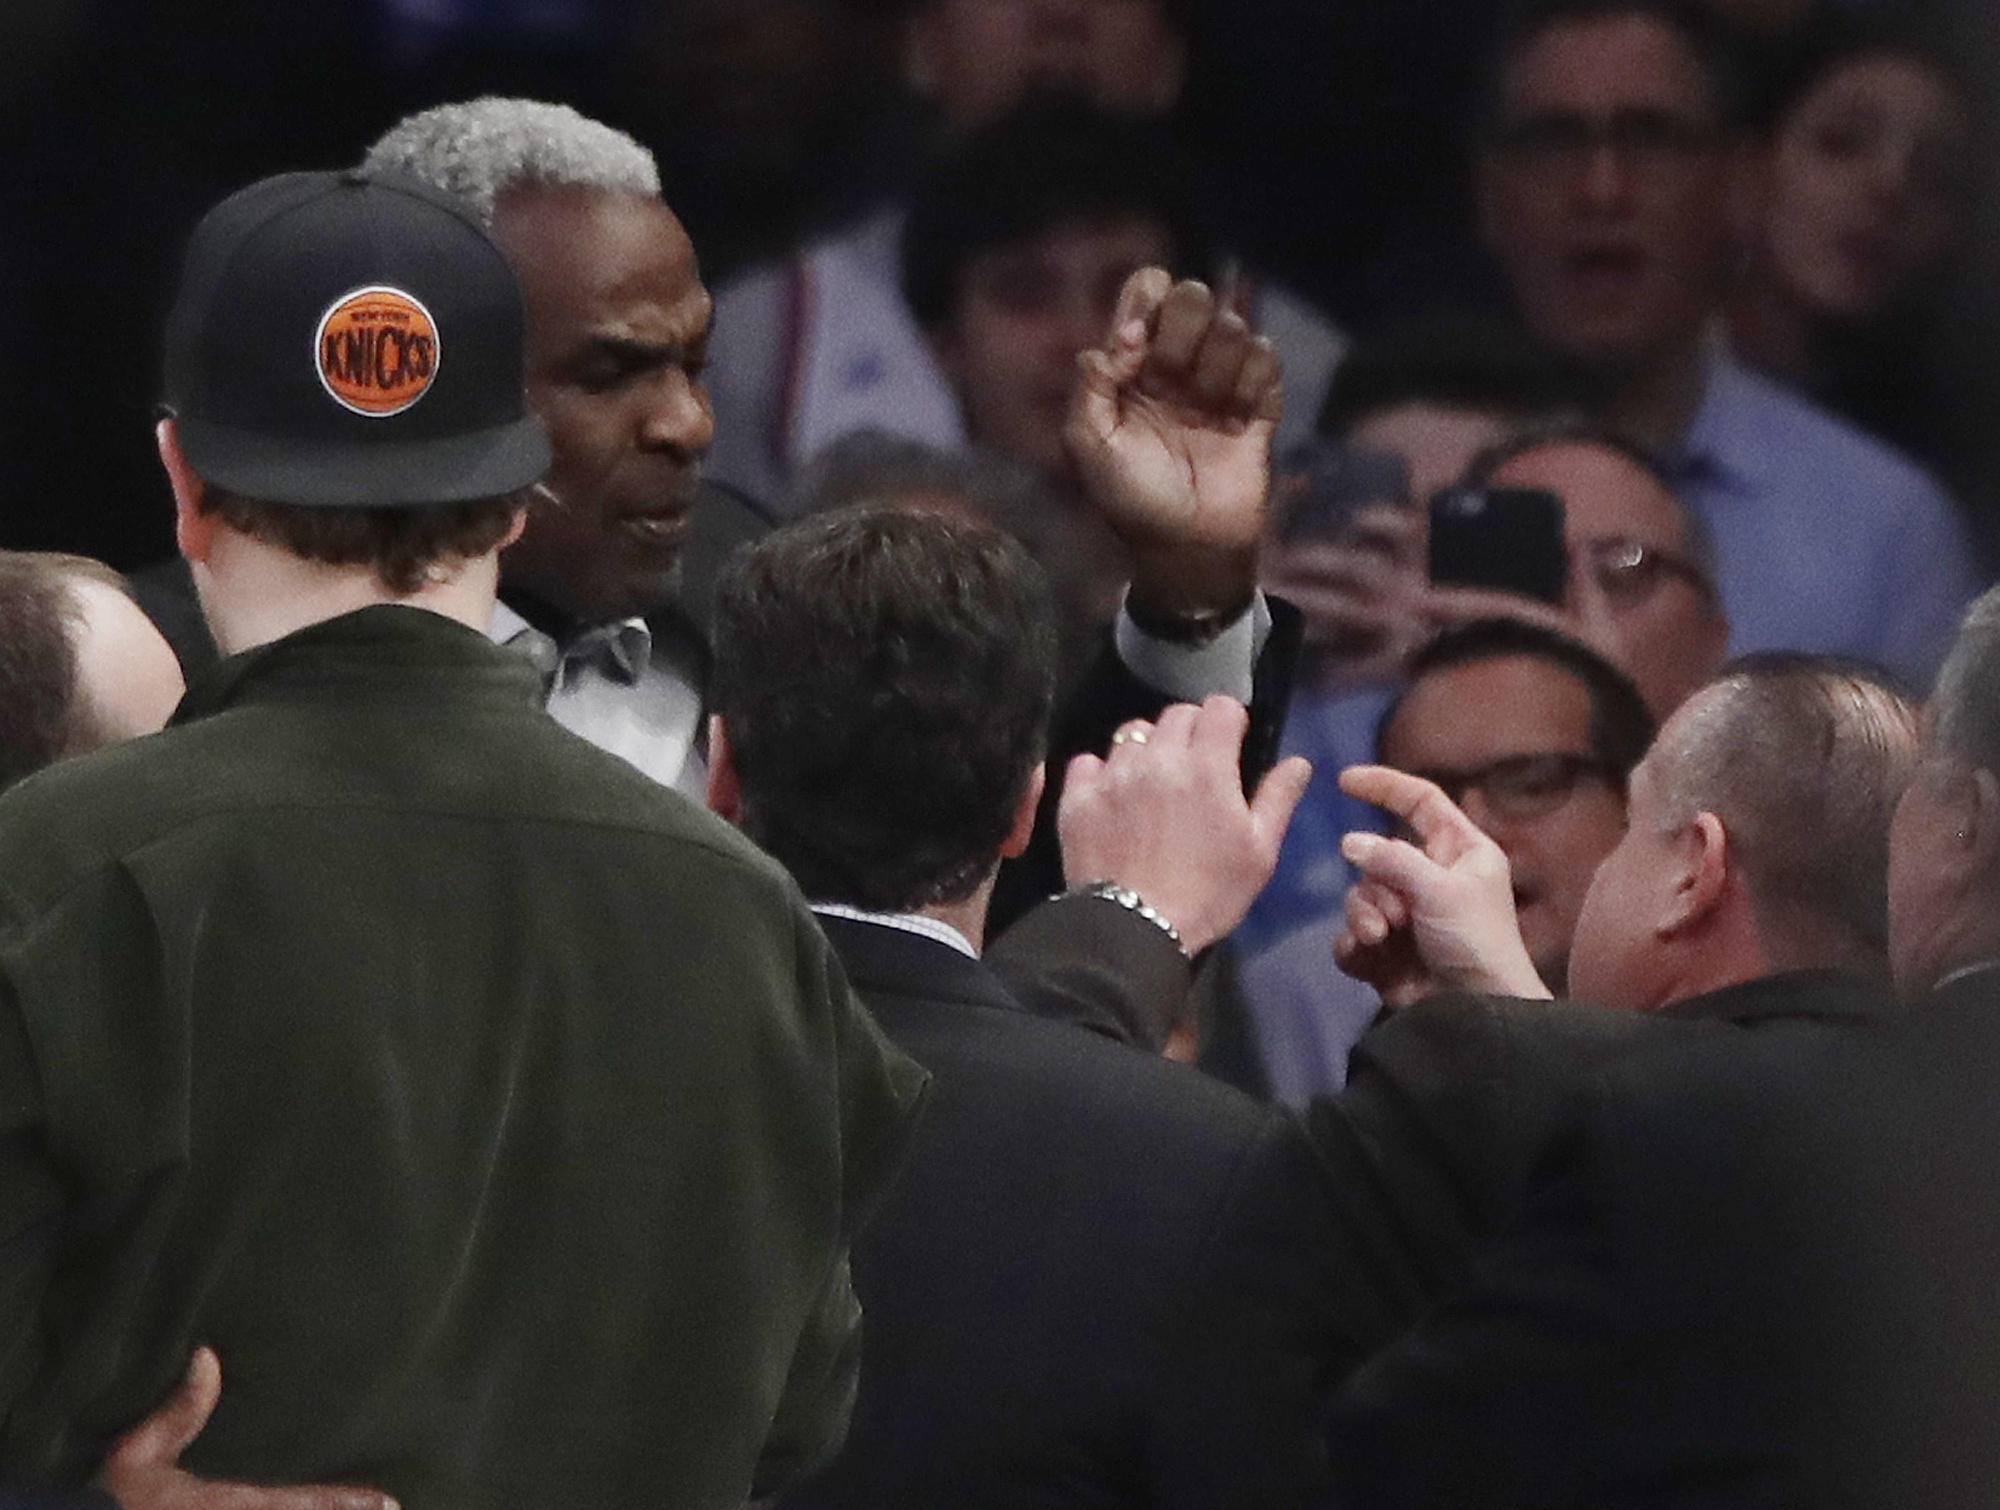 Former Knicks star Charles Oakley arrested after altercation at game - CBS News